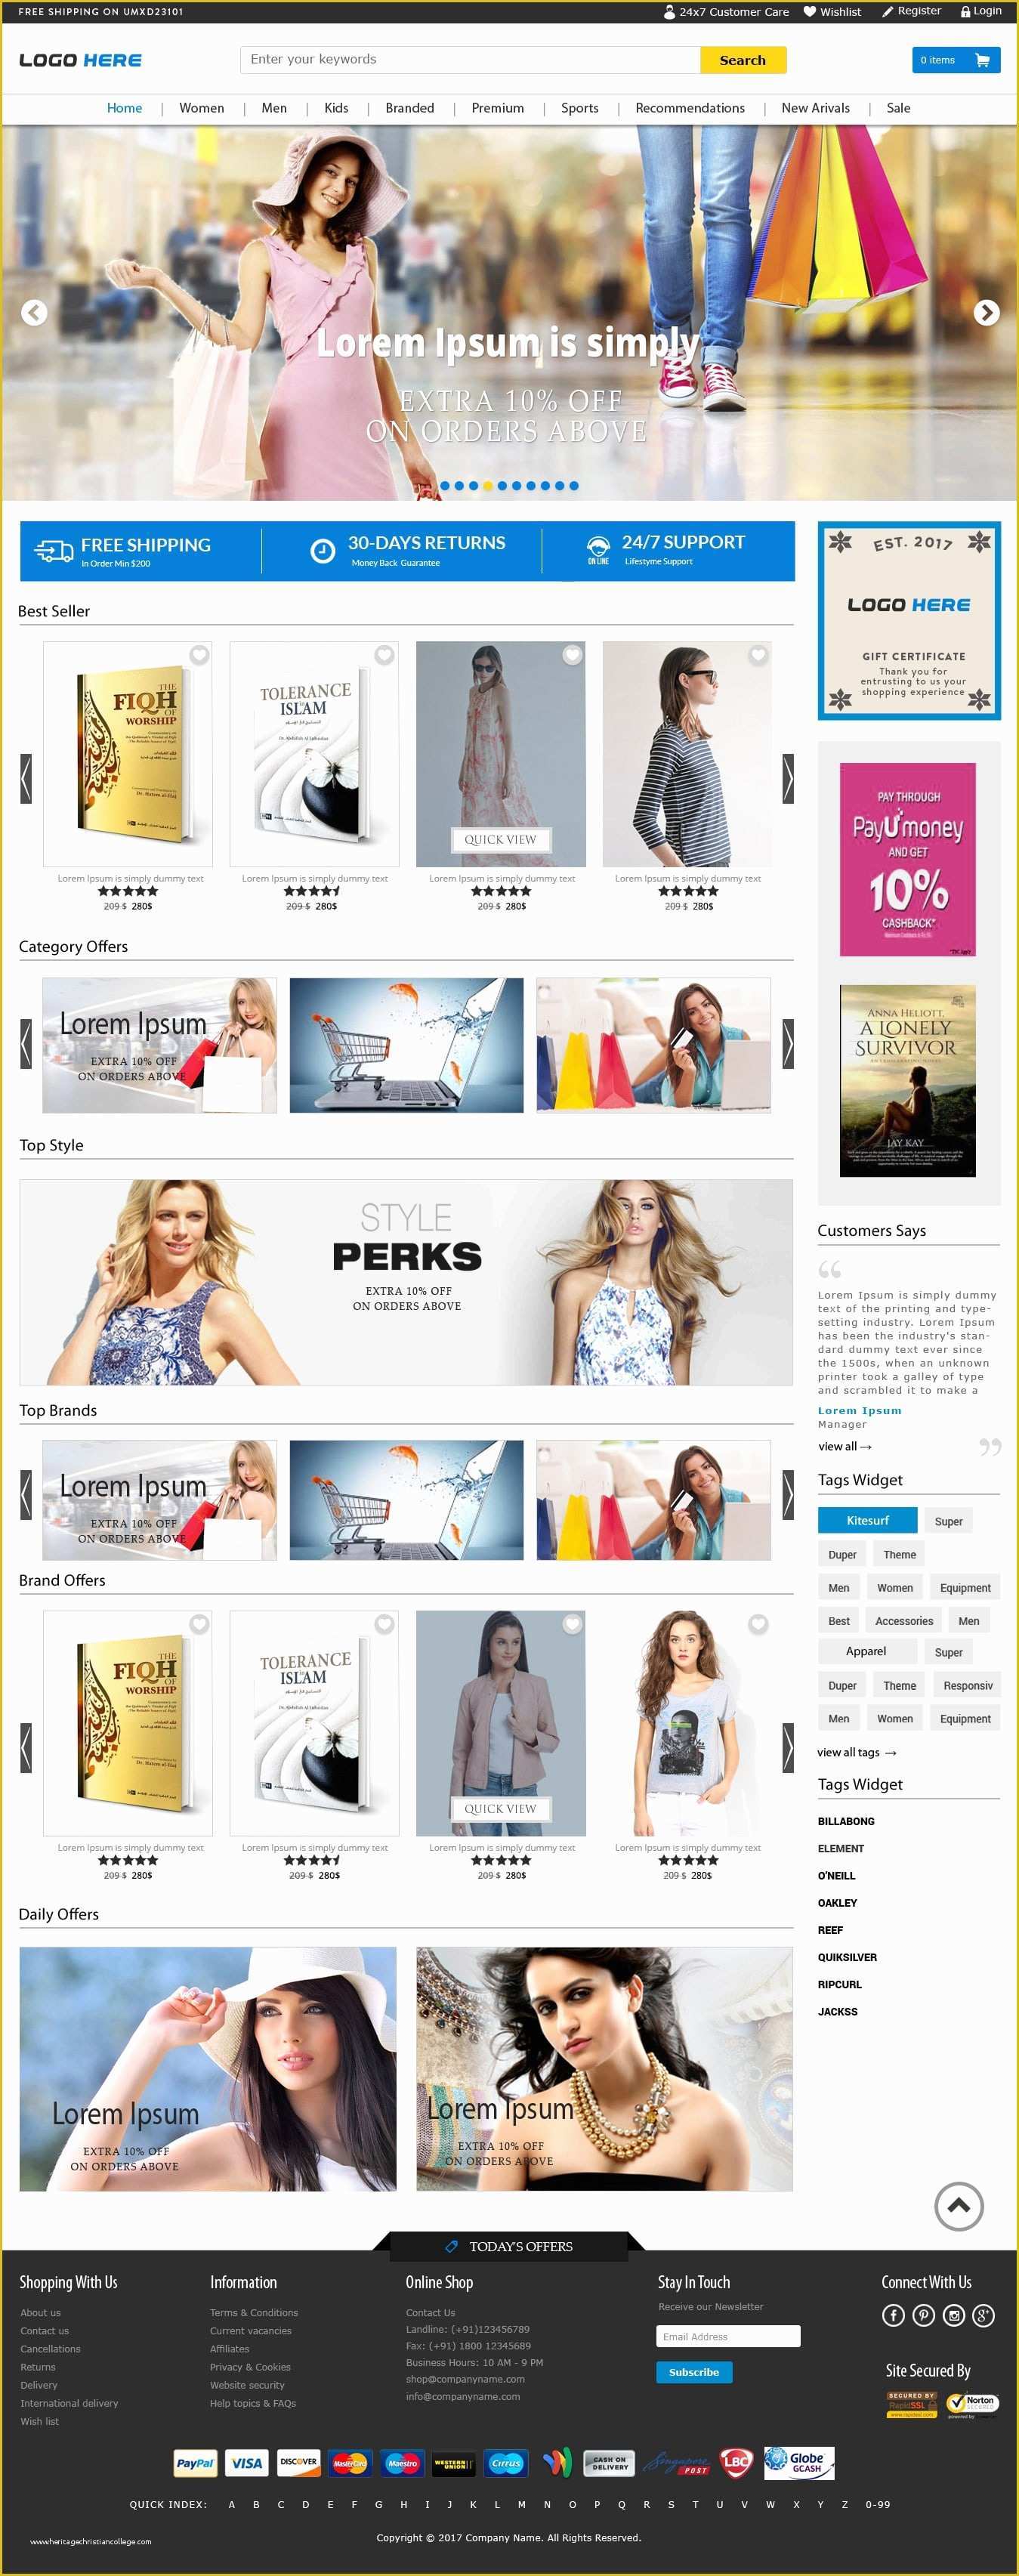 Html Template for Ecommerce Site Free Download Of Full Width E Merce Website Templates Free Psd